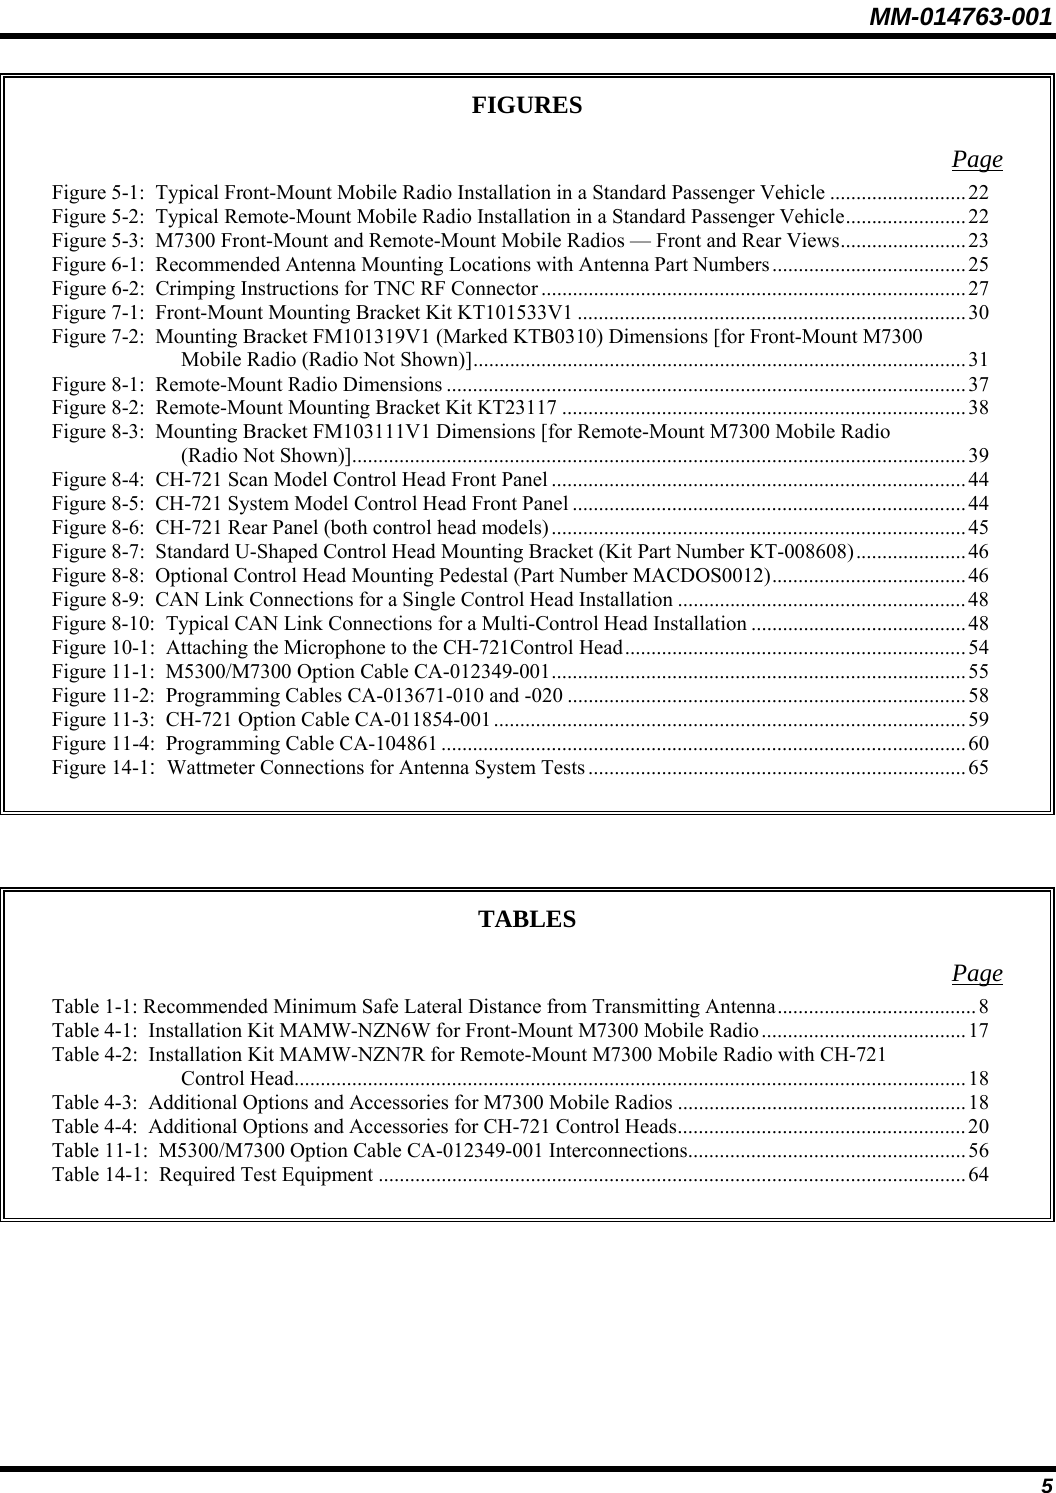 MM-014763-001 5 FIGURES Page Figure 5-1:  Typical Front-Mount Mobile Radio Installation in a Standard Passenger Vehicle ..........................22 Figure 5-2:  Typical Remote-Mount Mobile Radio Installation in a Standard Passenger Vehicle....................... 22 Figure 5-3:  M7300 Front-Mount and Remote-Mount Mobile Radios — Front and Rear Views........................ 23 Figure 6-1:  Recommended Antenna Mounting Locations with Antenna Part Numbers.....................................25 Figure 6-2:  Crimping Instructions for TNC RF Connector .................................................................................27 Figure 7-1:  Front-Mount Mounting Bracket Kit KT101533V1 ..........................................................................30 Figure 7-2:  Mounting Bracket FM101319V1 (Marked KTB0310) Dimensions [for Front-Mount M7300 Mobile Radio (Radio Not Shown)].............................................................................................. 31 Figure 8-1:  Remote-Mount Radio Dimensions ...................................................................................................37 Figure 8-2:  Remote-Mount Mounting Bracket Kit KT23117 .............................................................................38 Figure 8-3:  Mounting Bracket FM103111V1 Dimensions [for Remote-Mount M7300 Mobile Radio (Radio Not Shown)].....................................................................................................................39 Figure 8-4:  CH-721 Scan Model Control Head Front Panel ...............................................................................44 Figure 8-5:  CH-721 System Model Control Head Front Panel ...........................................................................44 Figure 8-6:  CH-721 Rear Panel (both control head models)............................................................................... 45 Figure 8-7:  Standard U-Shaped Control Head Mounting Bracket (Kit Part Number KT-008608)..................... 46 Figure 8-8:  Optional Control Head Mounting Pedestal (Part Number MACDOS0012).....................................46 Figure 8-9:  CAN Link Connections for a Single Control Head Installation .......................................................48 Figure 8-10:  Typical CAN Link Connections for a Multi-Control Head Installation .........................................48 Figure 10-1:  Attaching the Microphone to the CH-721Control Head................................................................. 54 Figure 11-1:  M5300/M7300 Option Cable CA-012349-001...............................................................................55 Figure 11-2:  Programming Cables CA-013671-010 and -020 ............................................................................58 Figure 11-3:  CH-721 Option Cable CA-011854-001..........................................................................................59 Figure 11-4:  Programming Cable CA-104861 ....................................................................................................60 Figure 14-1:  Wattmeter Connections for Antenna System Tests ........................................................................65     TABLES Page Table 1-1: Recommended Minimum Safe Lateral Distance from Transmitting Antenna......................................8 Table 4-1:  Installation Kit MAMW-NZN6W for Front-Mount M7300 Mobile Radio.......................................17 Table 4-2:  Installation Kit MAMW-NZN7R for Remote-Mount M7300 Mobile Radio with CH-721 Control Head................................................................................................................................18 Table 4-3:  Additional Options and Accessories for M7300 Mobile Radios ....................................................... 18 Table 4-4:  Additional Options and Accessories for CH-721 Control Heads.......................................................20 Table 11-1:  M5300/M7300 Option Cable CA-012349-001 Interconnections.....................................................56 Table 14-1:  Required Test Equipment ................................................................................................................64   